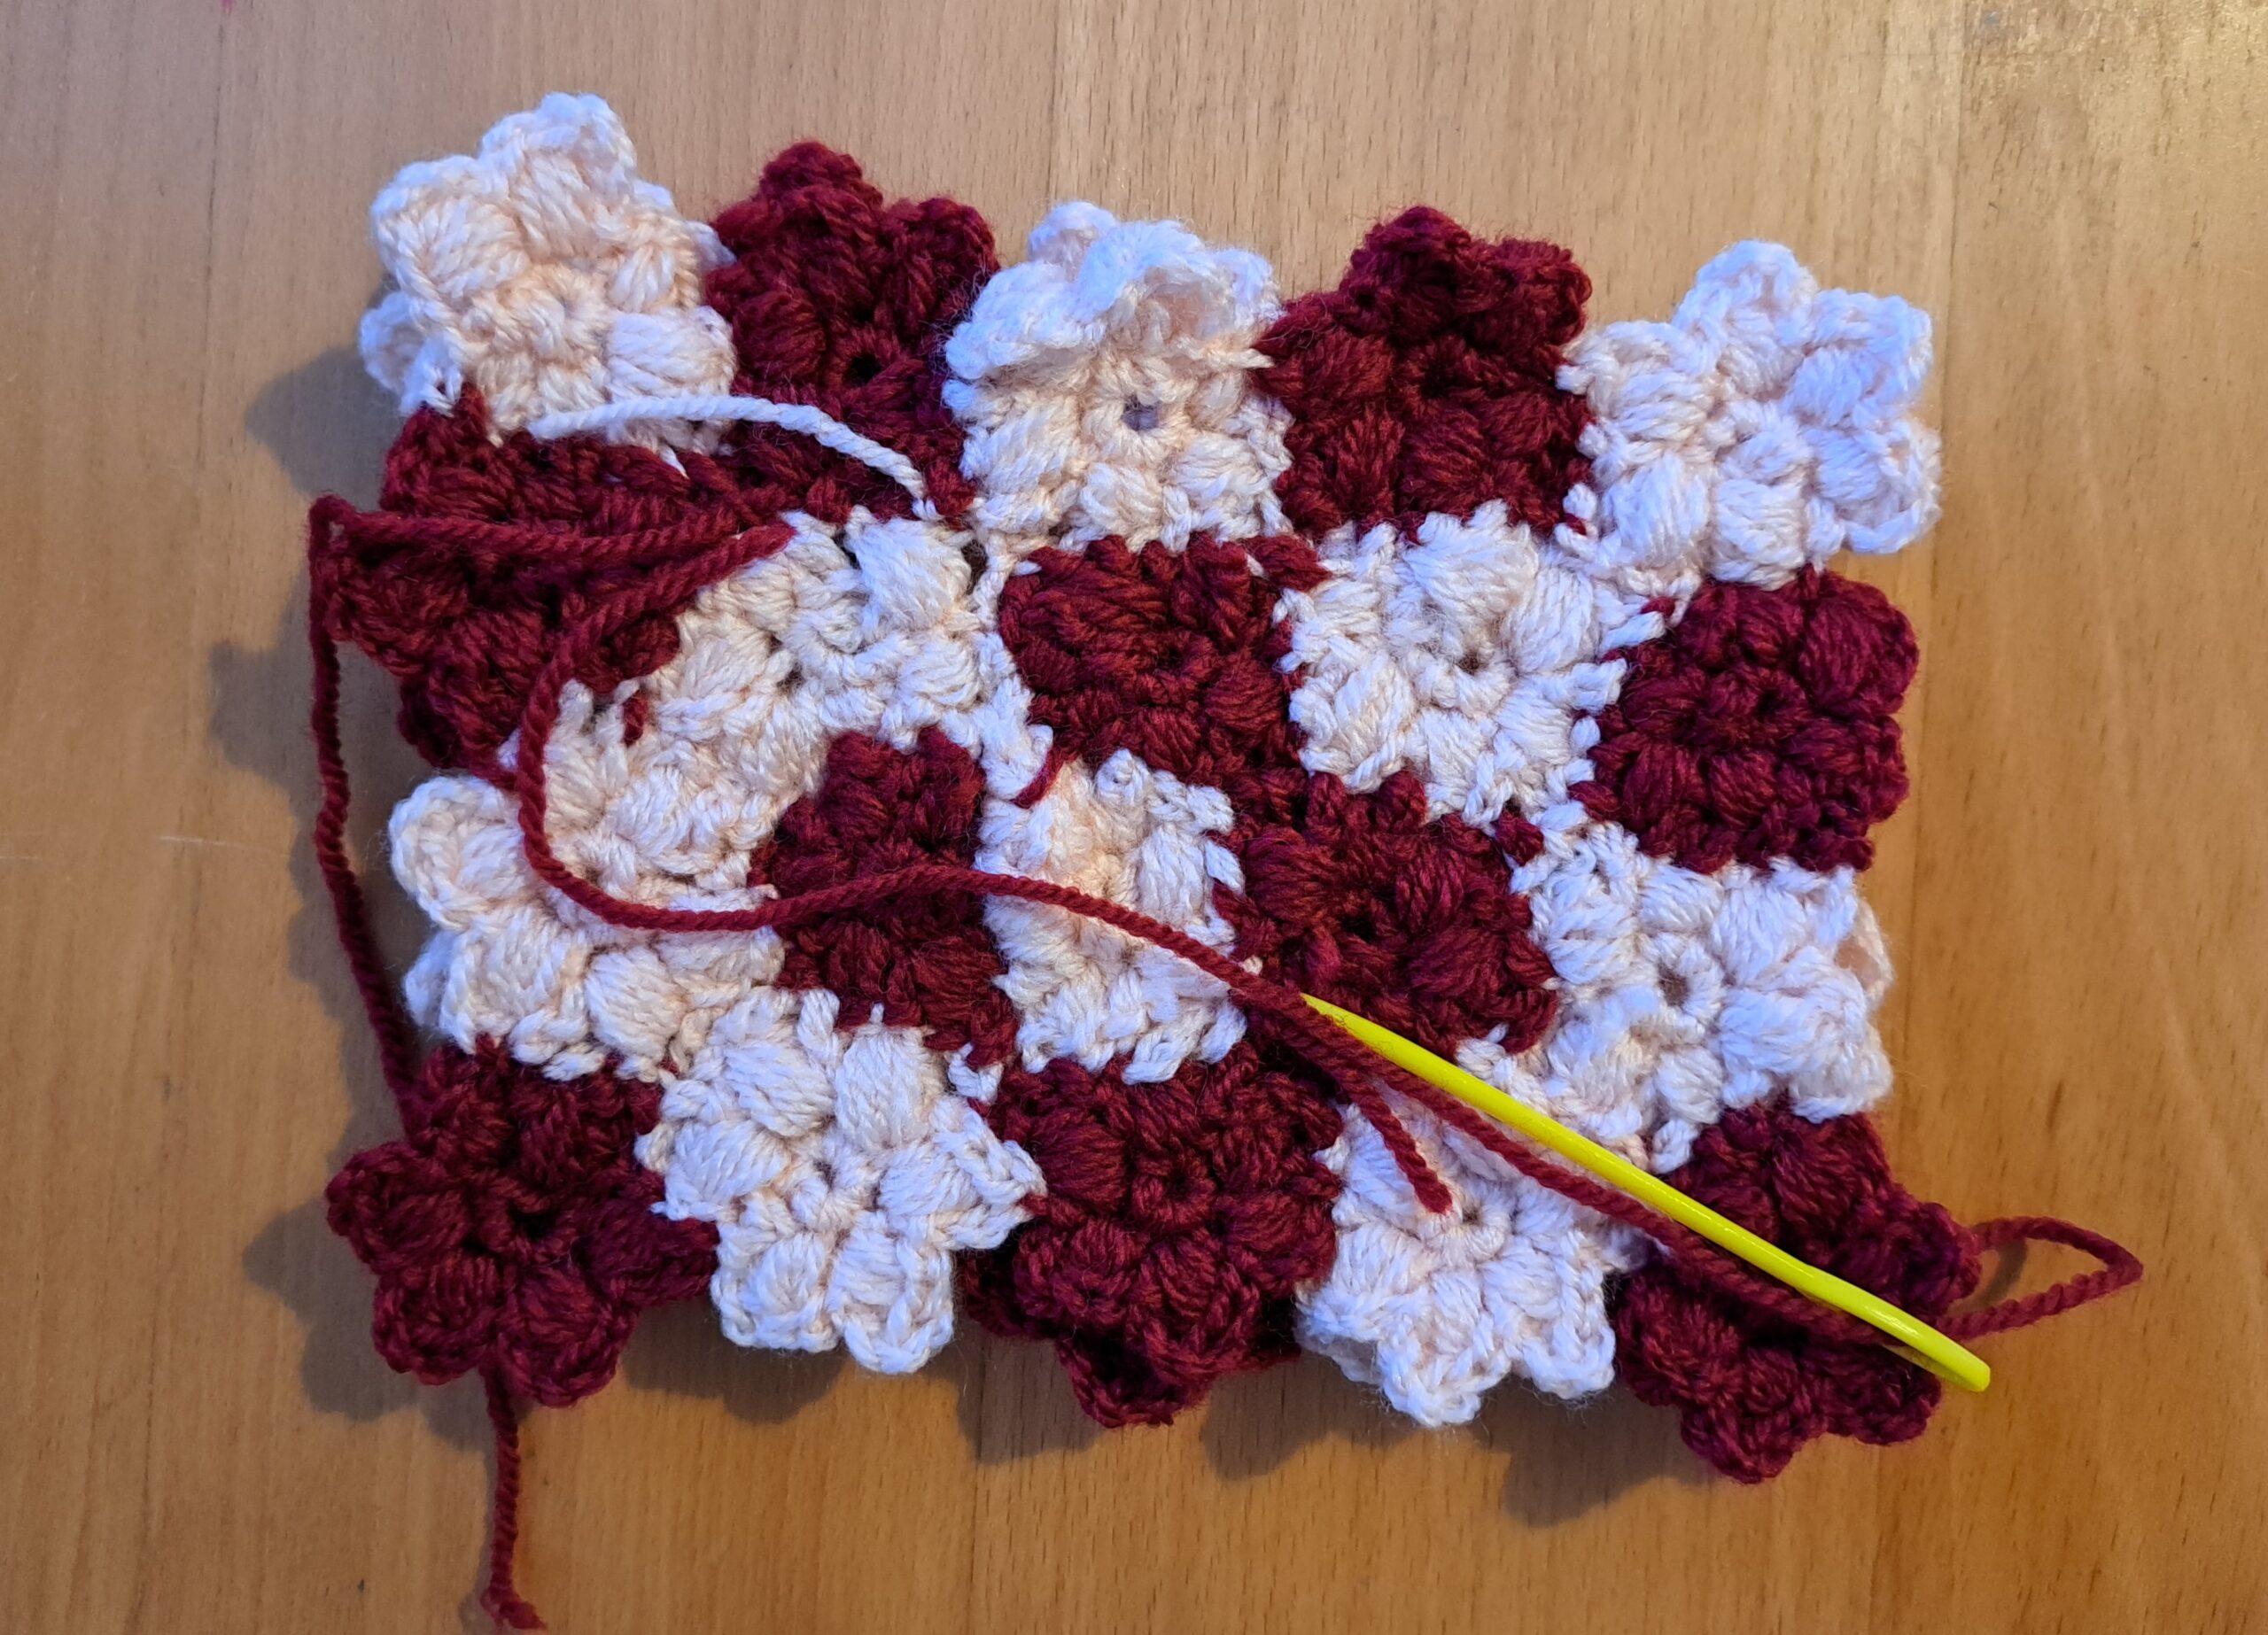 Sew flowers together